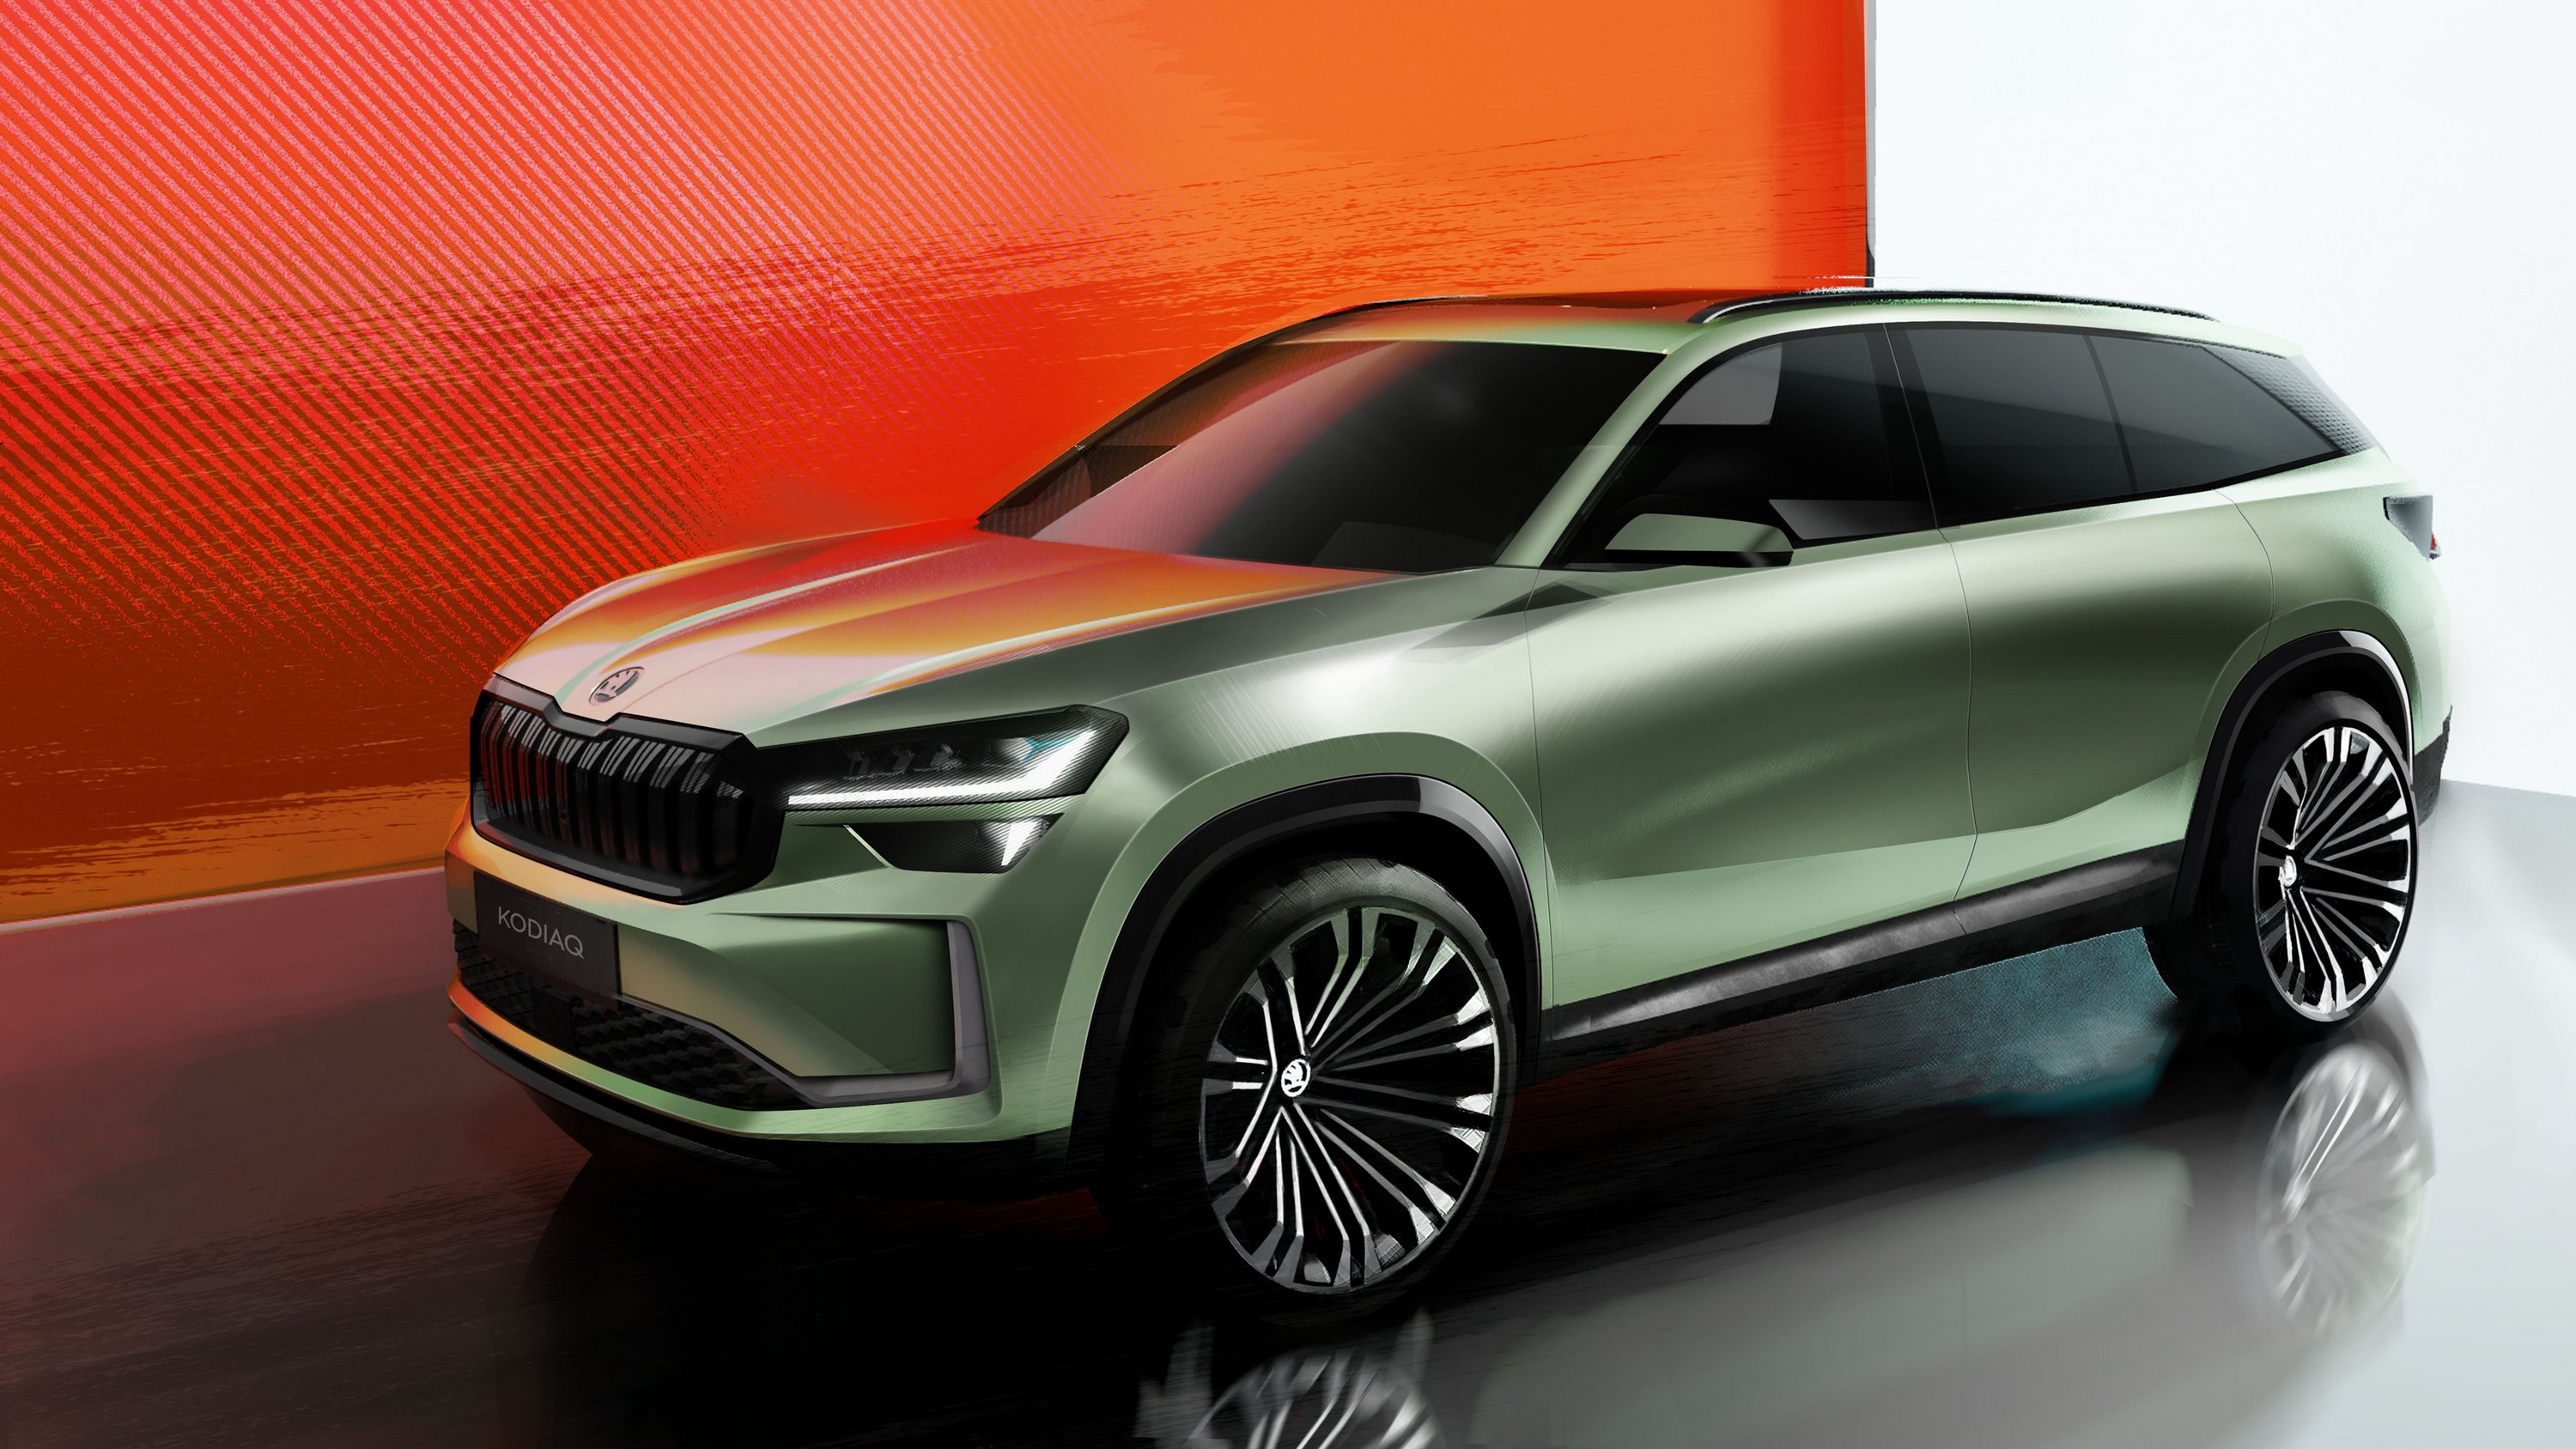 The first images show the new seven-seater Skoda 4